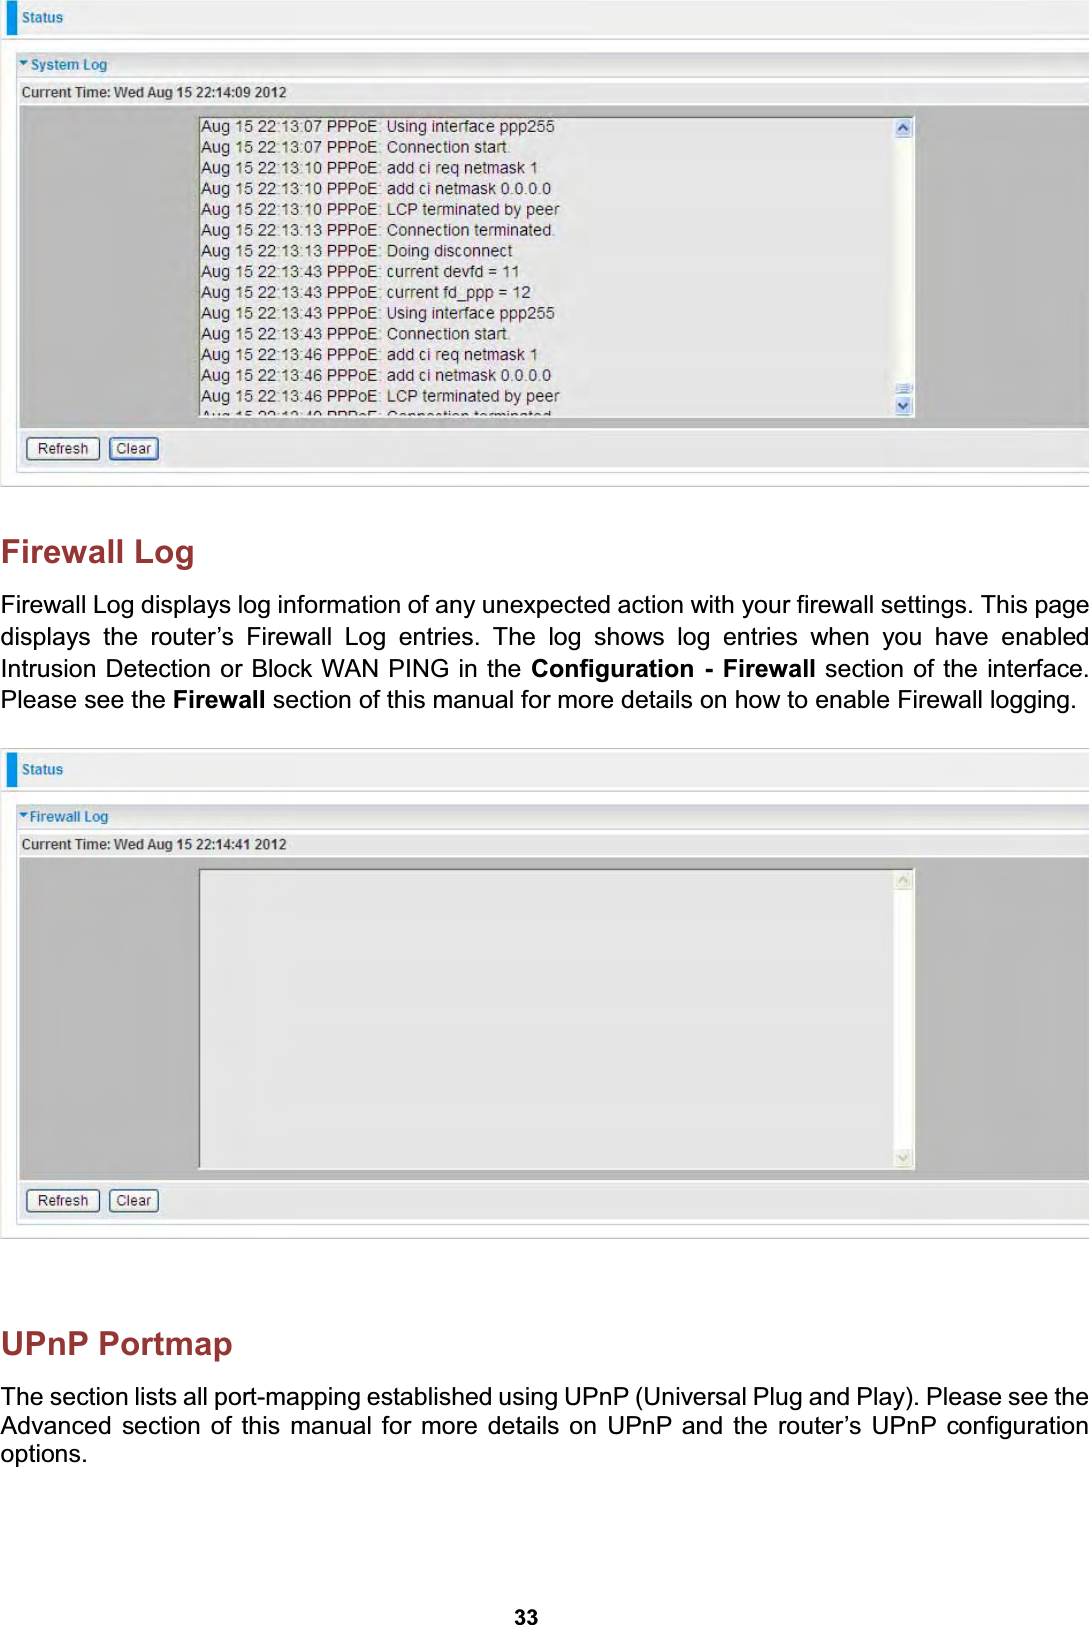  33   Firewall Log Firewall Log displays log information of any unexpected action with your firewall settings. This page displays the router’s Firewall Log entries. The log shows log entries when you have enabled Intrusion Detection or Block WAN PING in the Configuration - Firewall section of the interface. Please see the Firewall section of this manual for more details on how to enable Firewall logging.      UPnP Portmap The section lists all port-mapping established using UPnP (Universal Plug and Play). Please see the Advanced section of this manual for more details on UPnP and the router’s UPnP configuration options.   